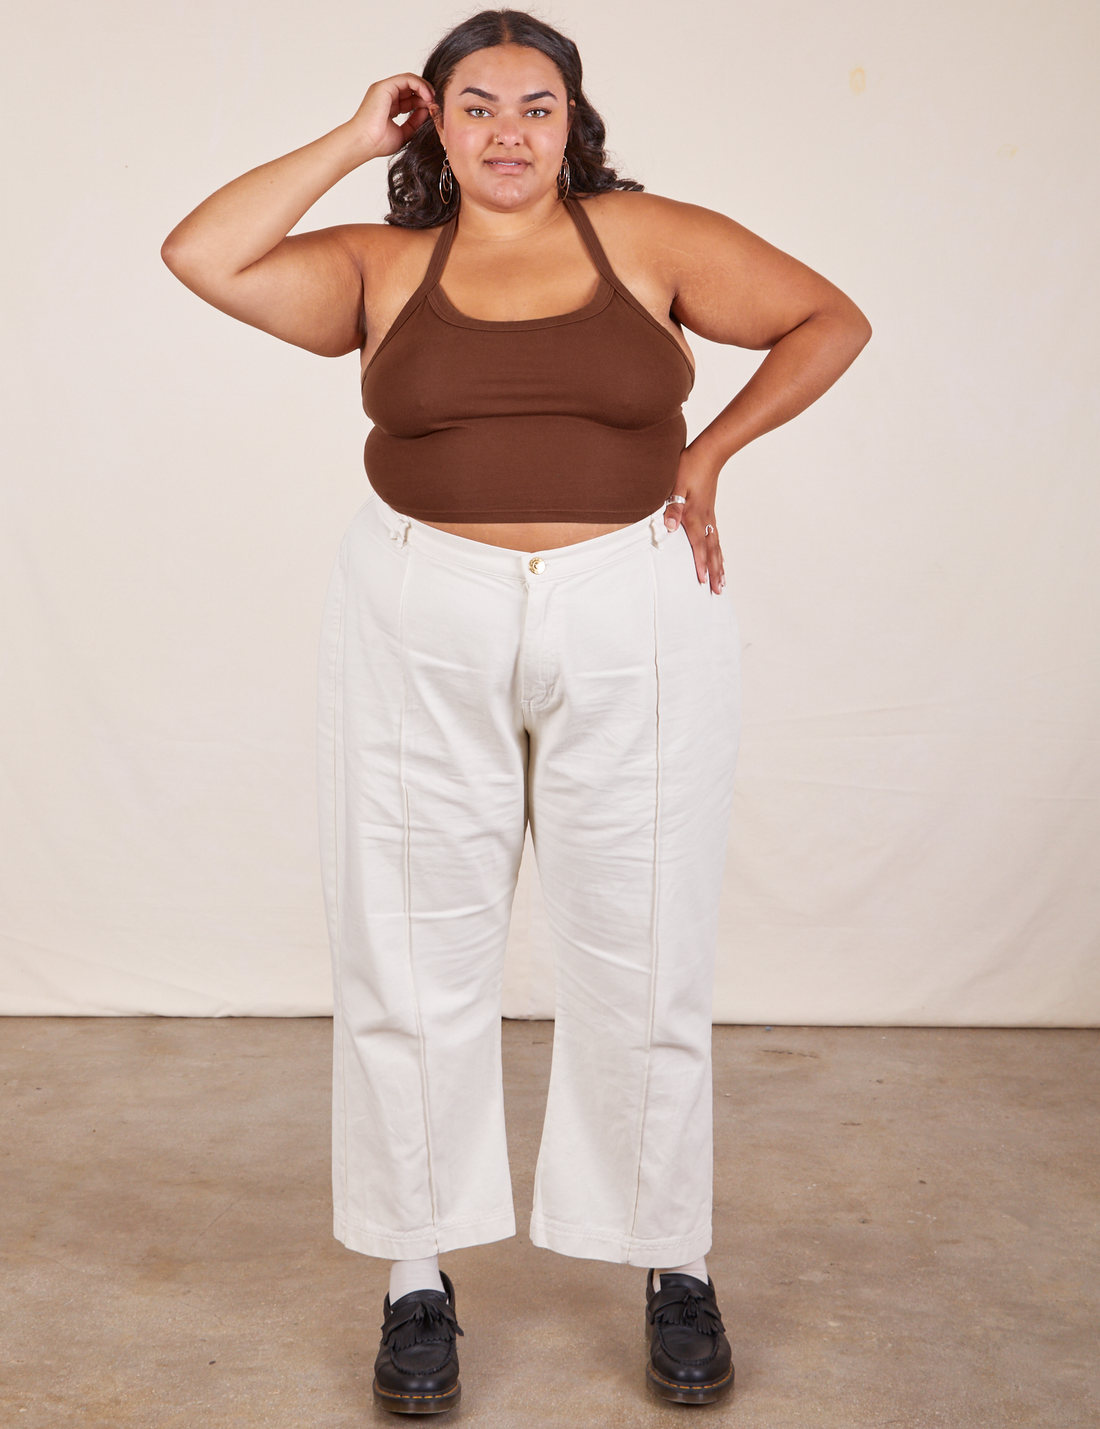 Alicia is wearing Halter Top in Fudgesicle Brown and vintage off-white Western Pants